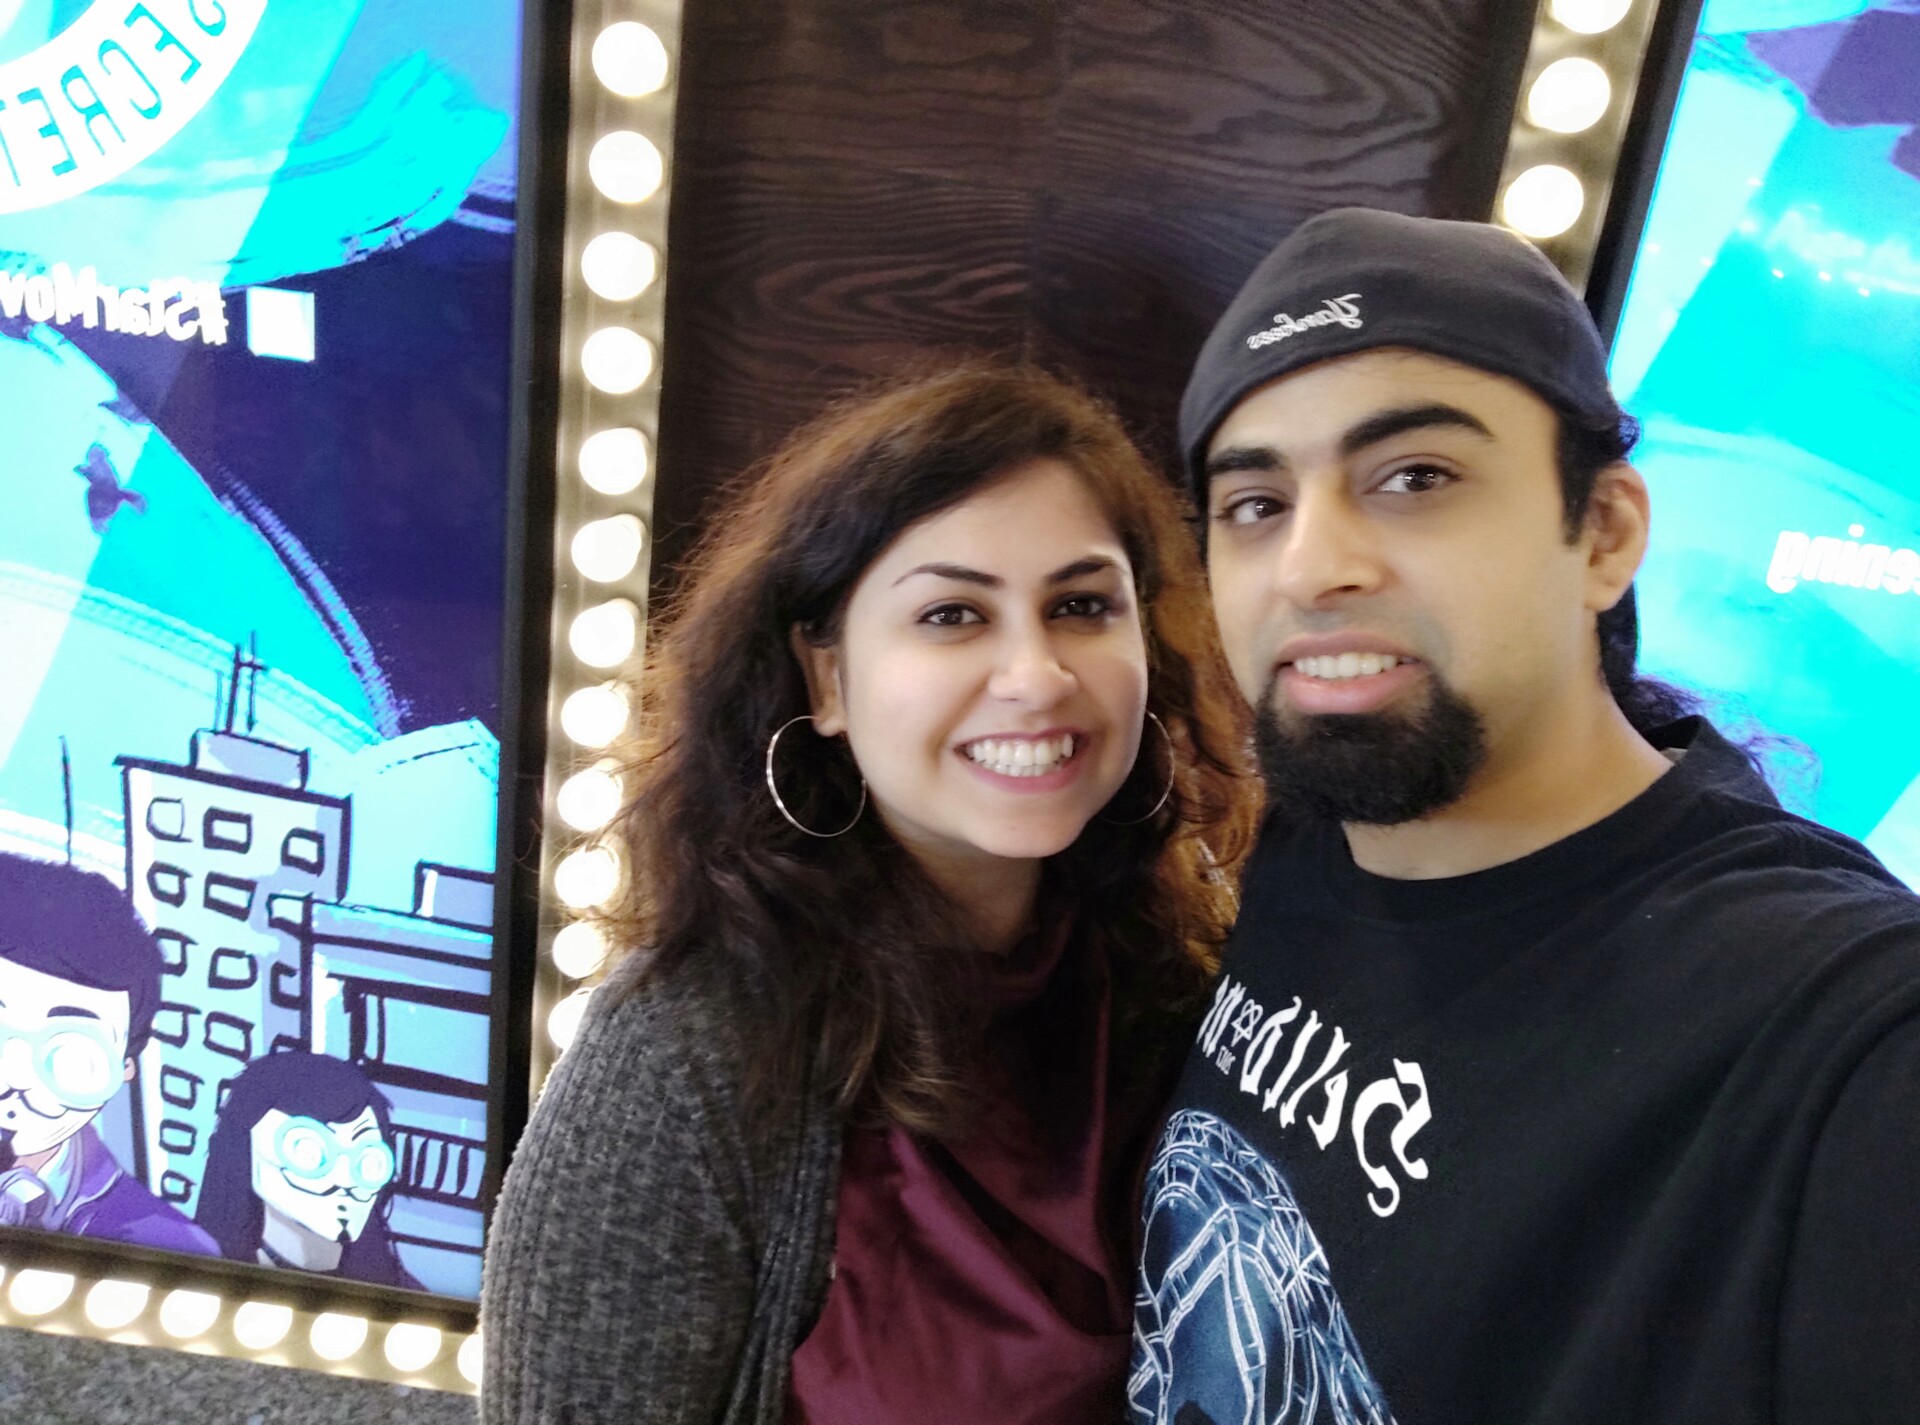 Indoor selfie photo sample from the Redmi Note 7 Pro.